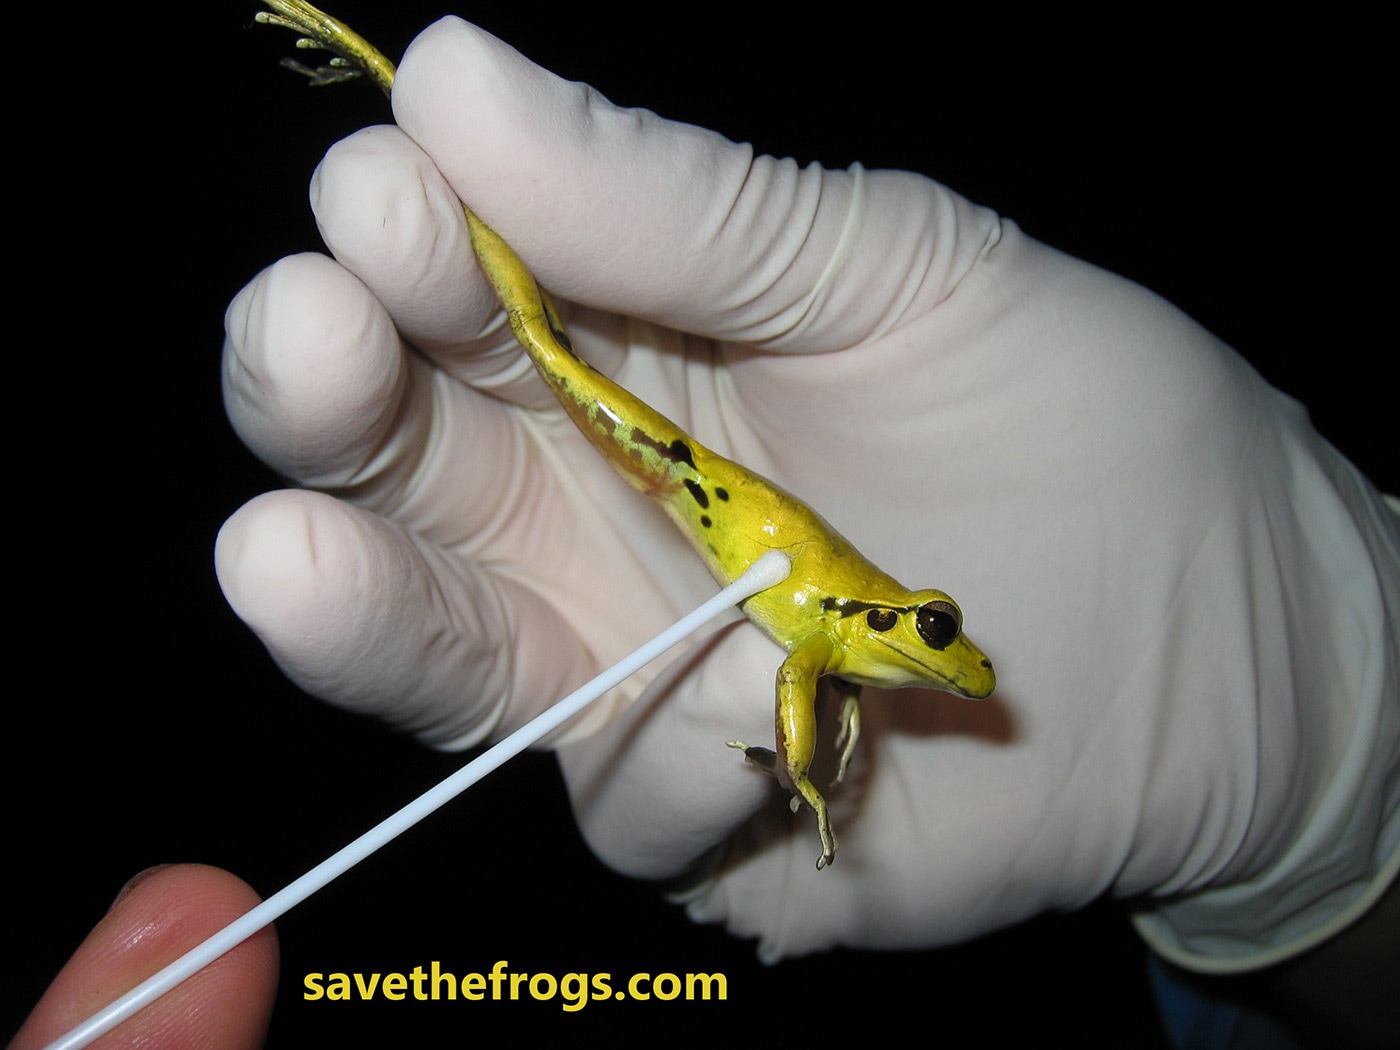 How To Hold A Frog - Swab